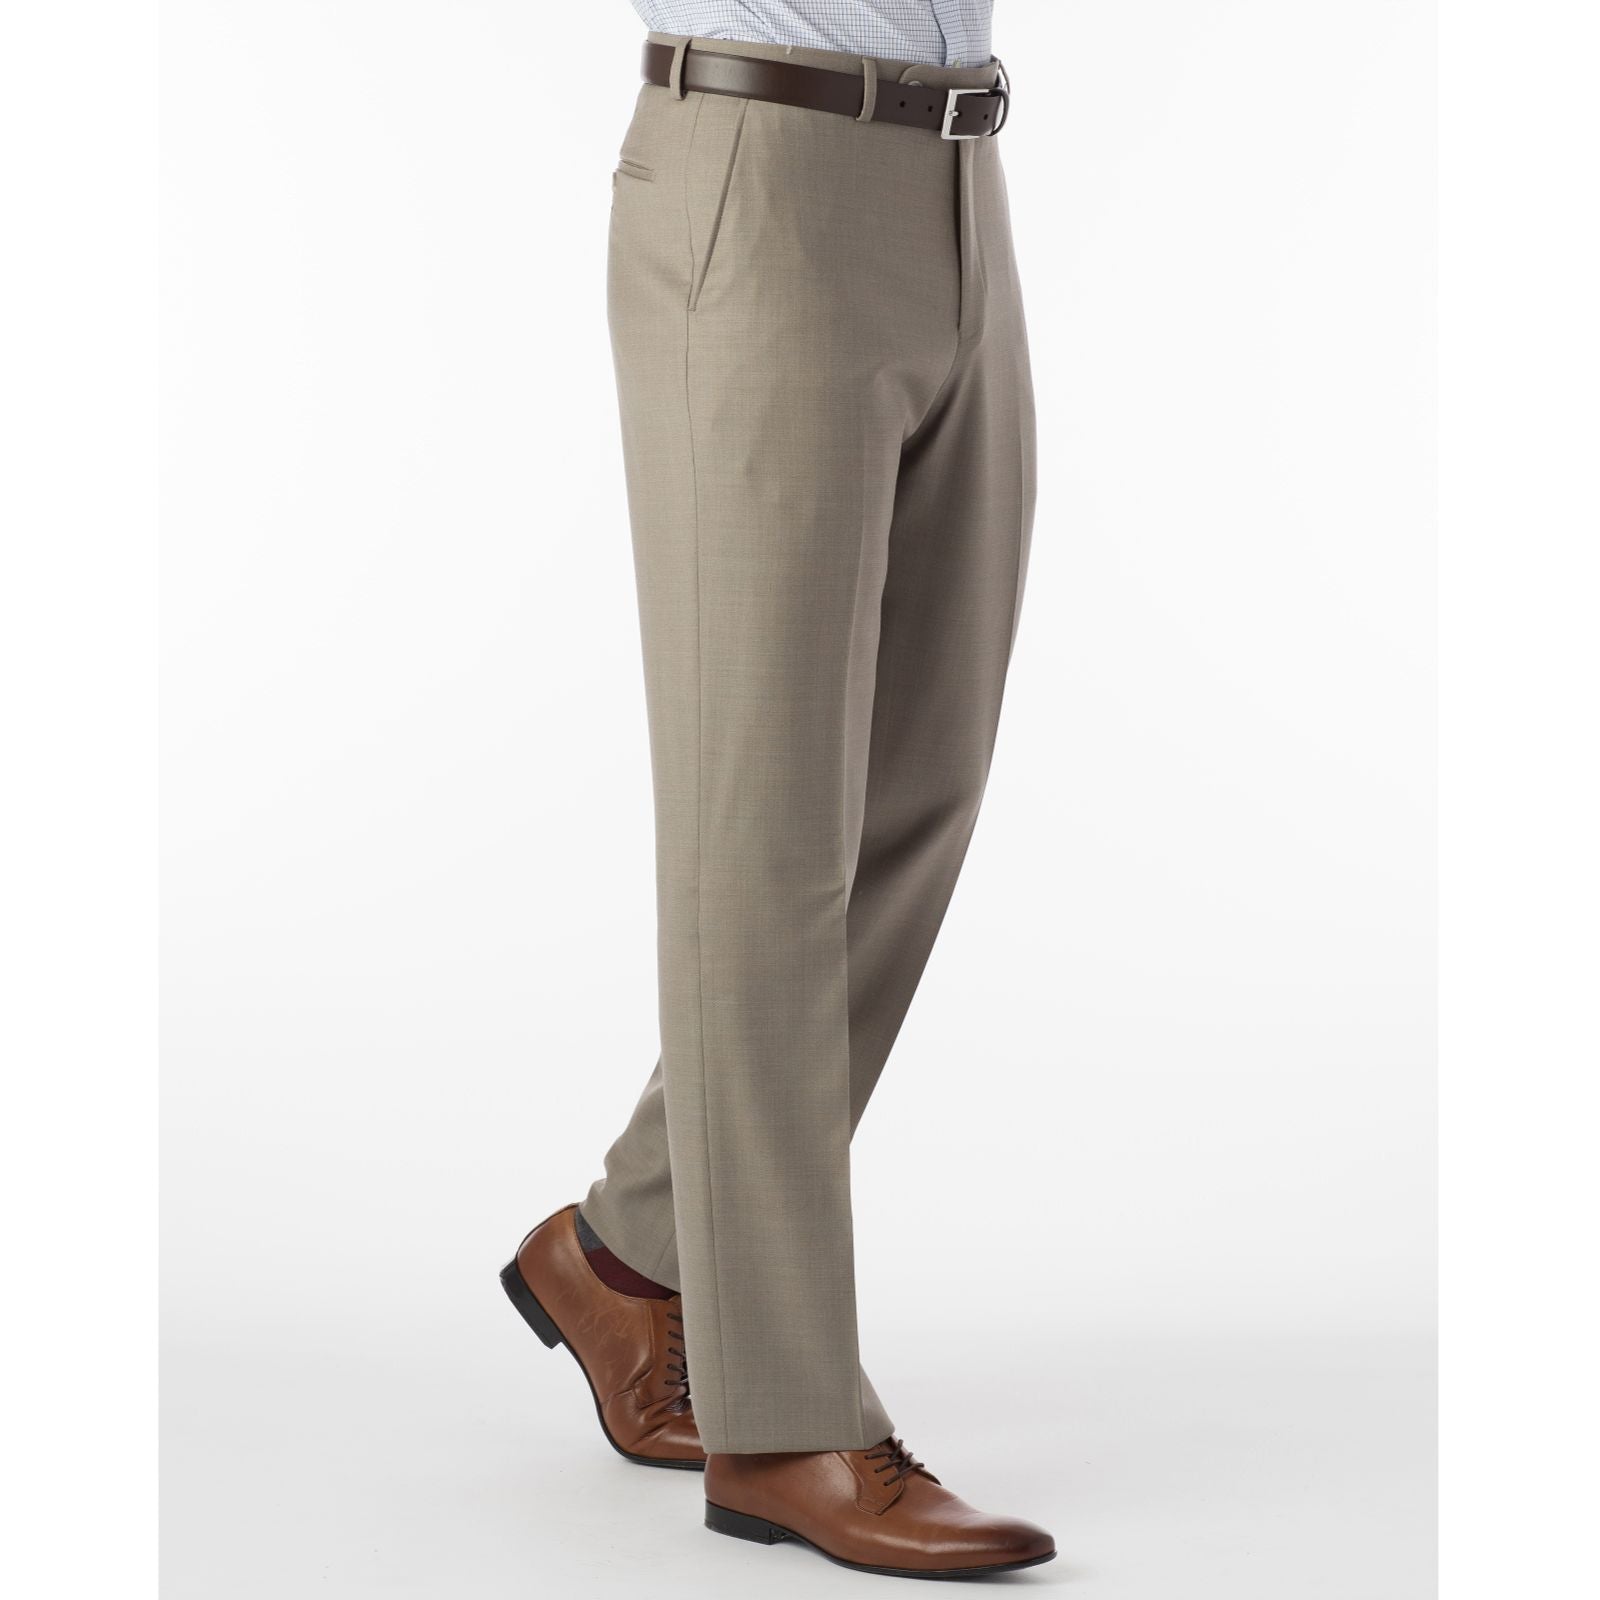 Super 120s Luxury Wool Serge Comfort-EZE Trouser in Taupe (Flat Front Models) by Ballin